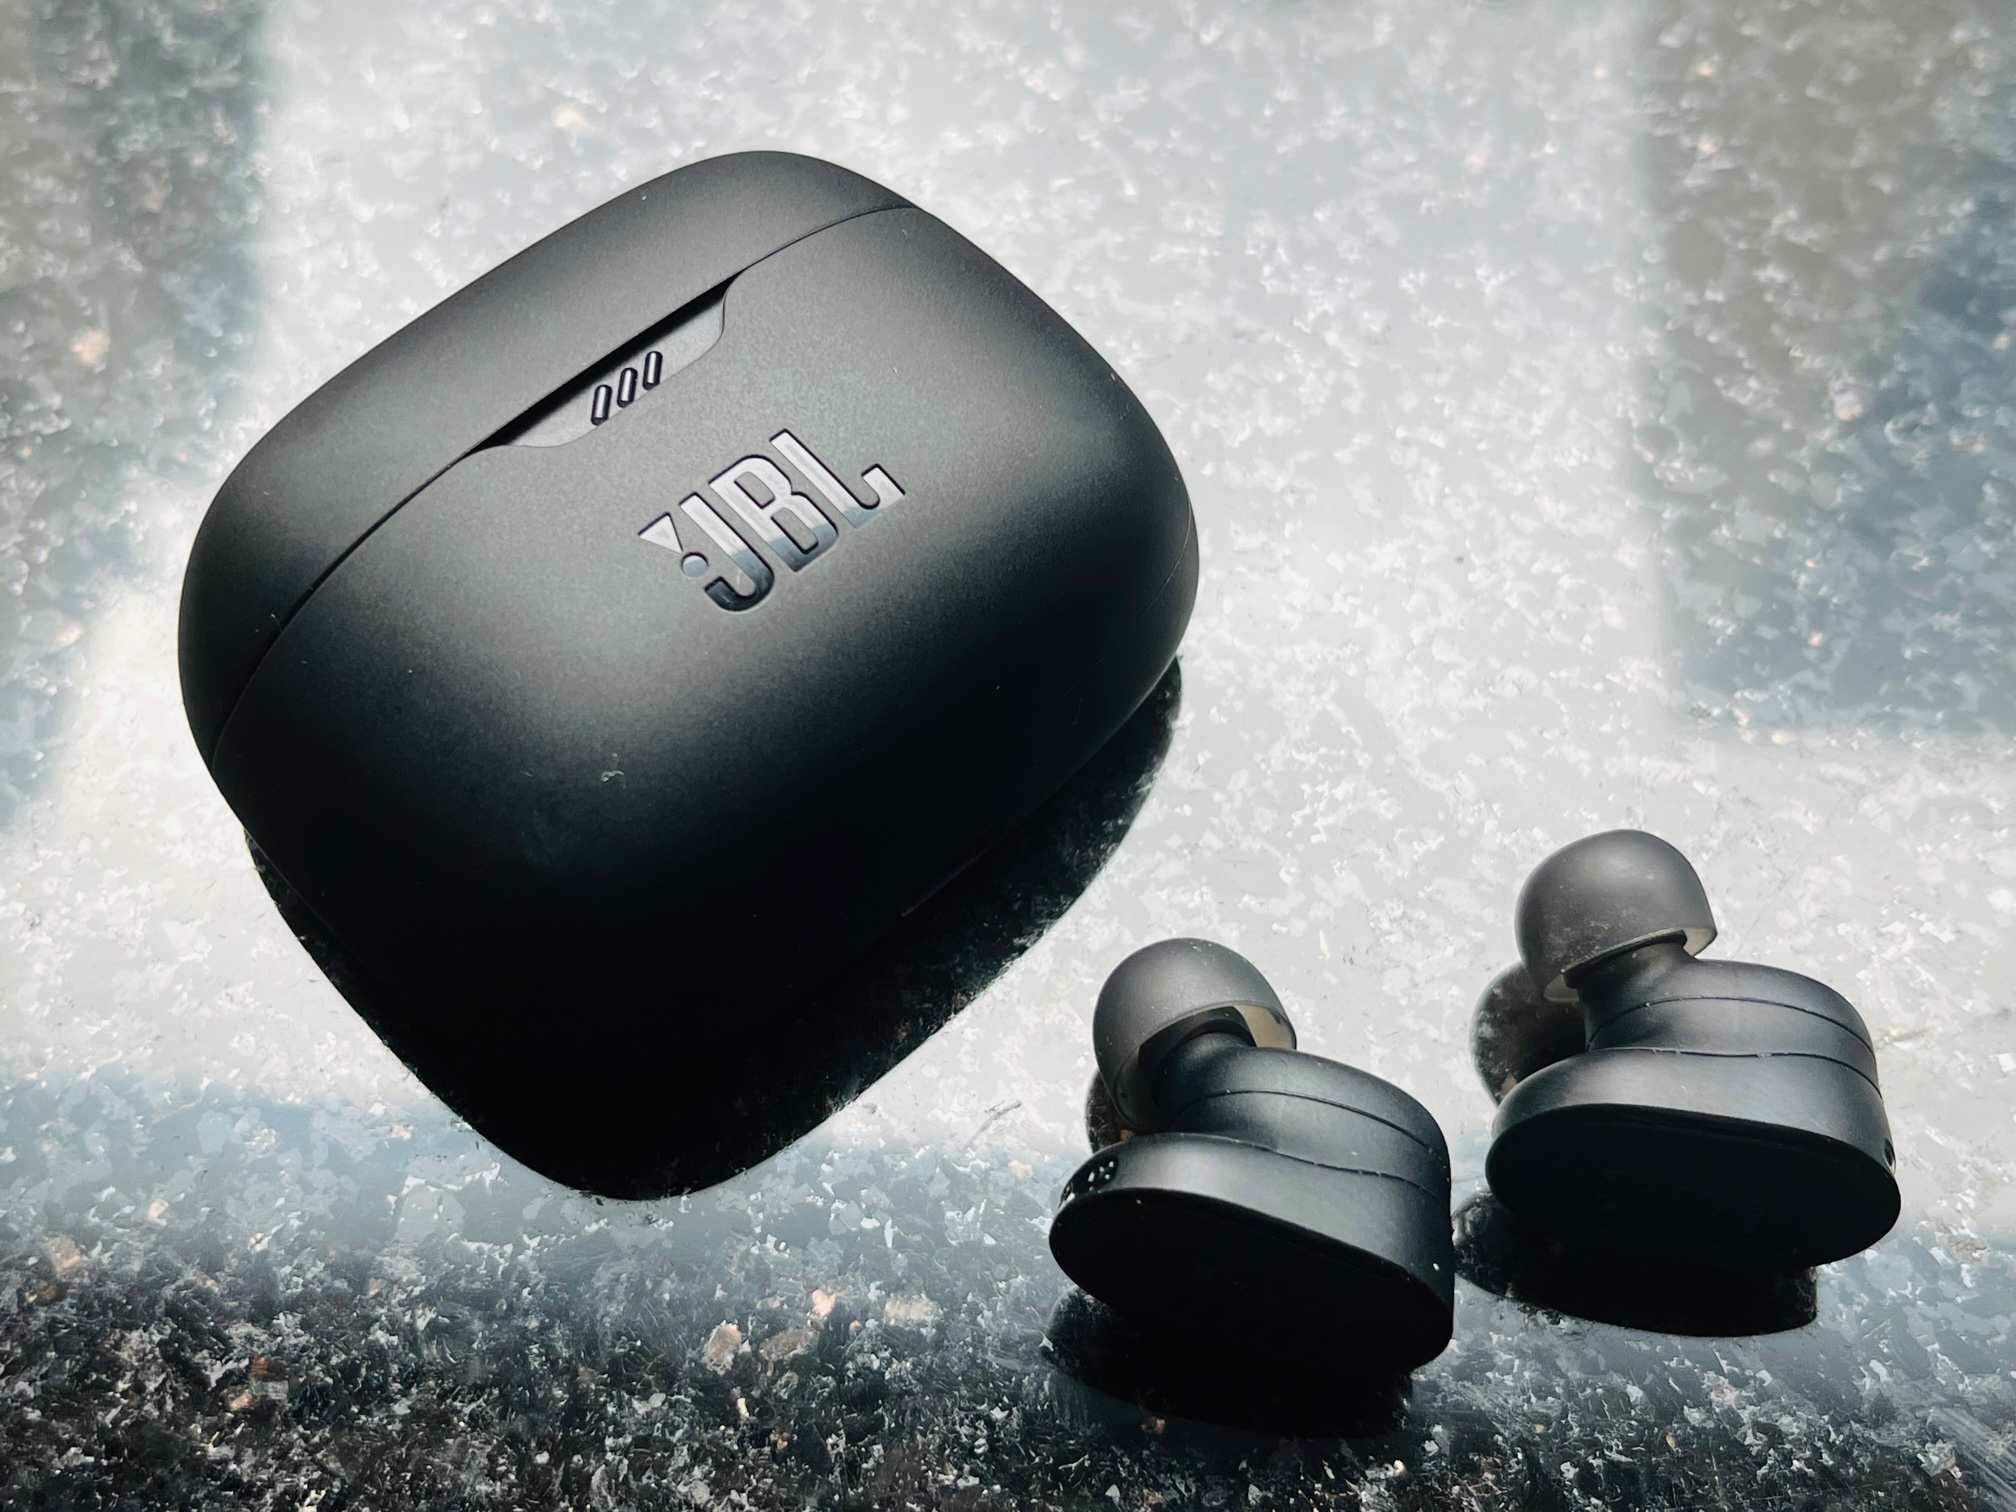 JBL T110 - Unboxing and Review 